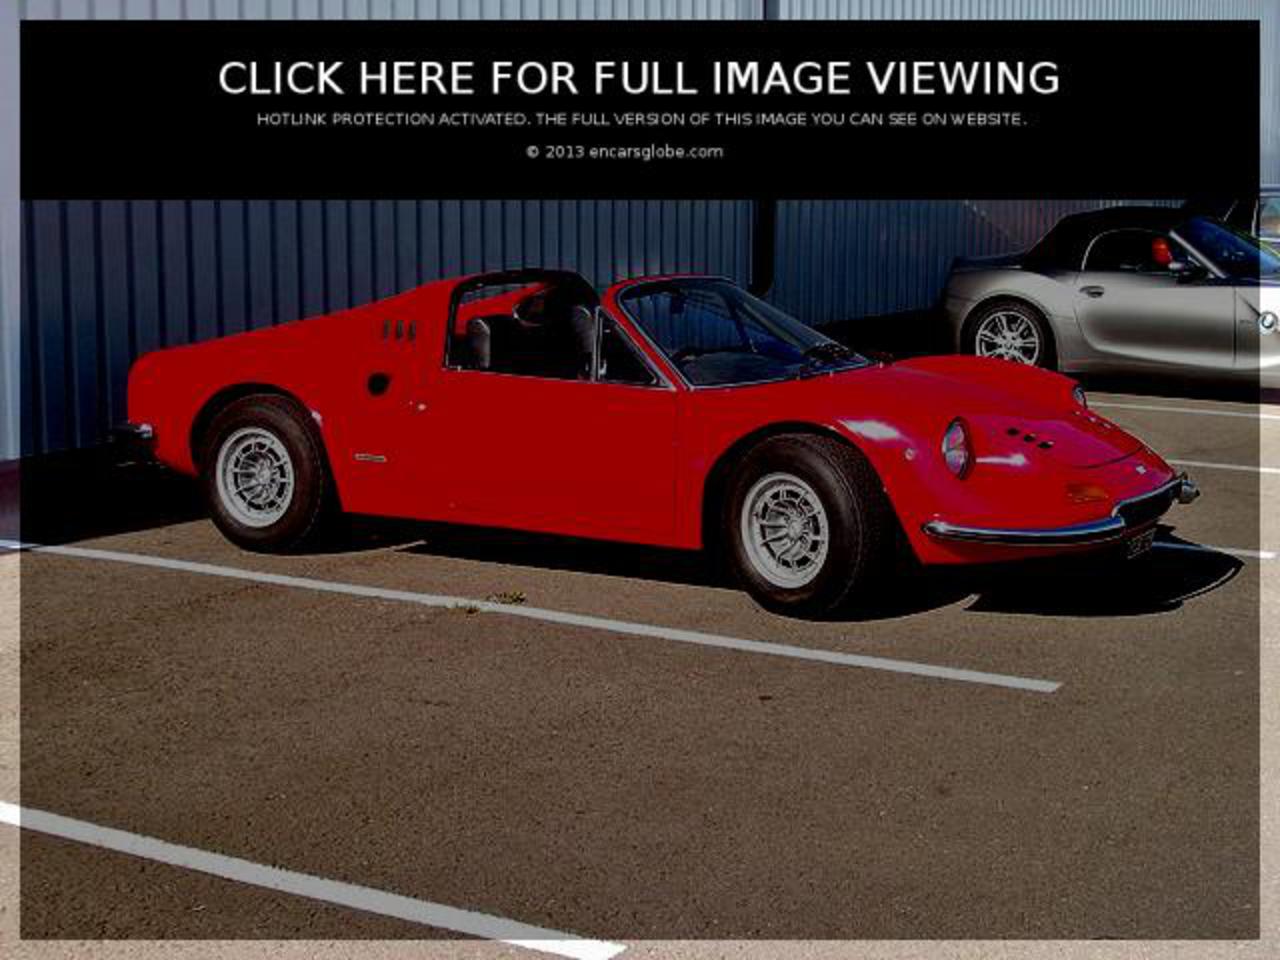 Dino 246 GTB: Photo gallery, complete information about model ...